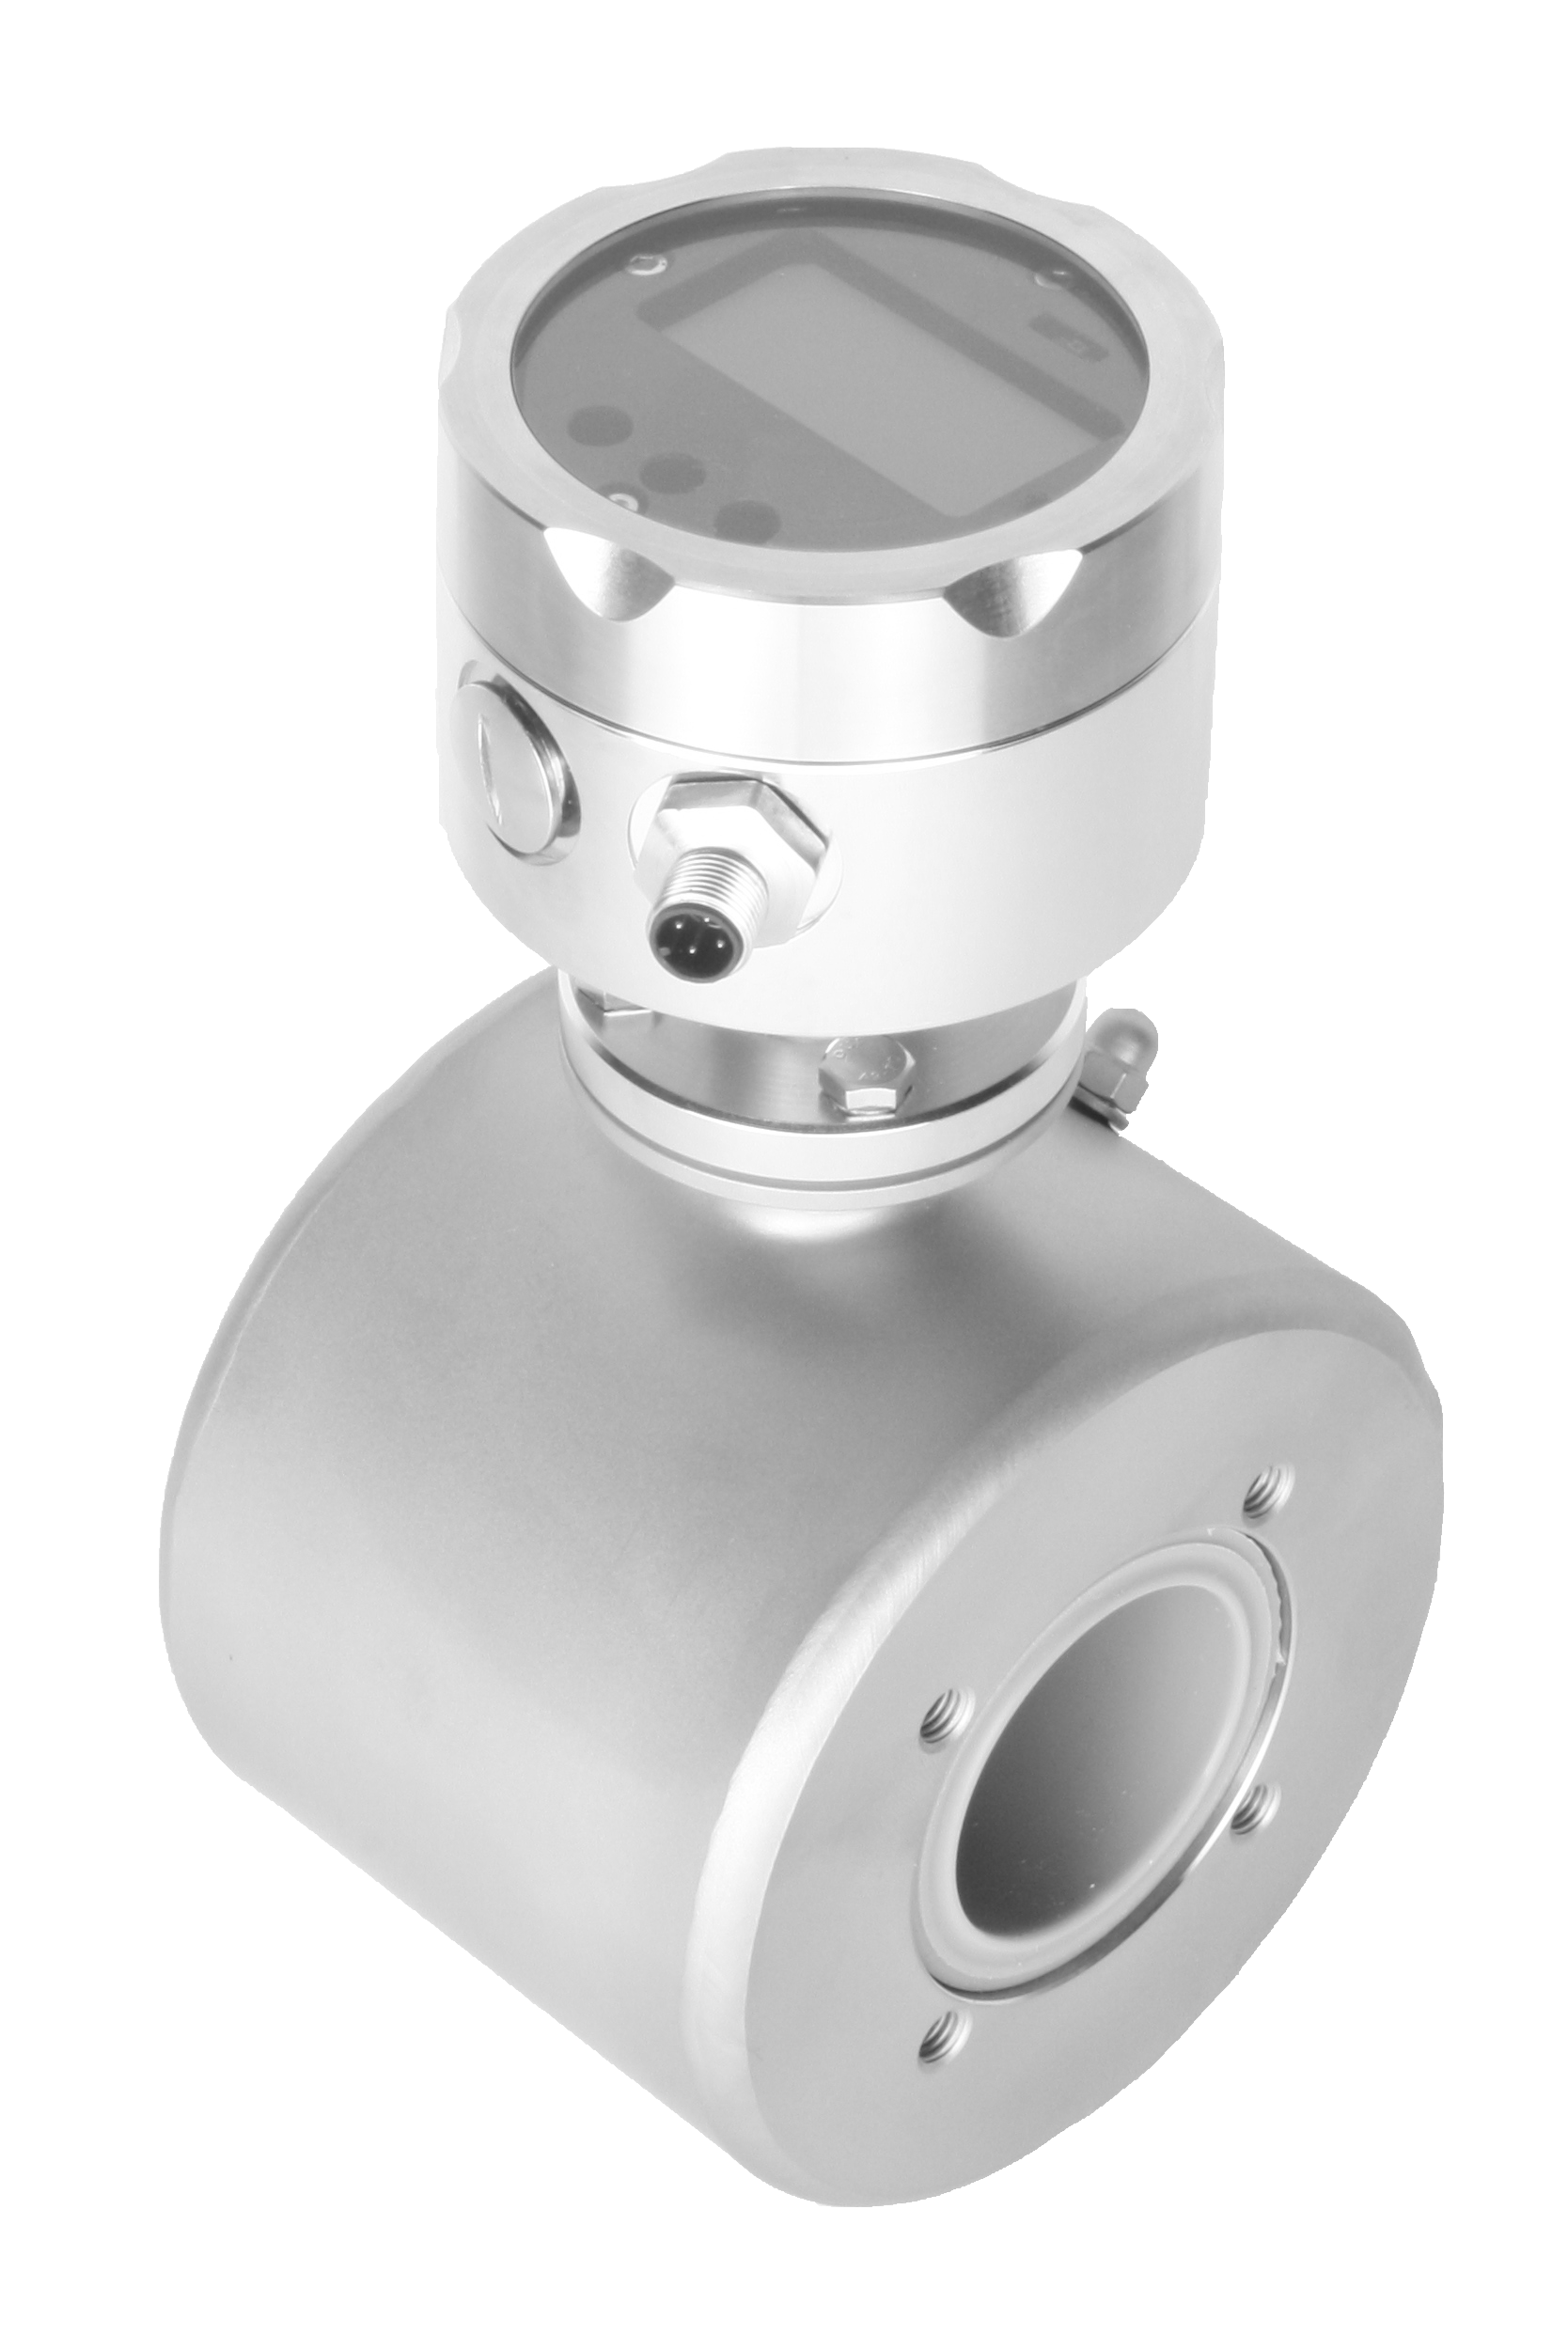 The CMAG flow meter with integrated digital display.